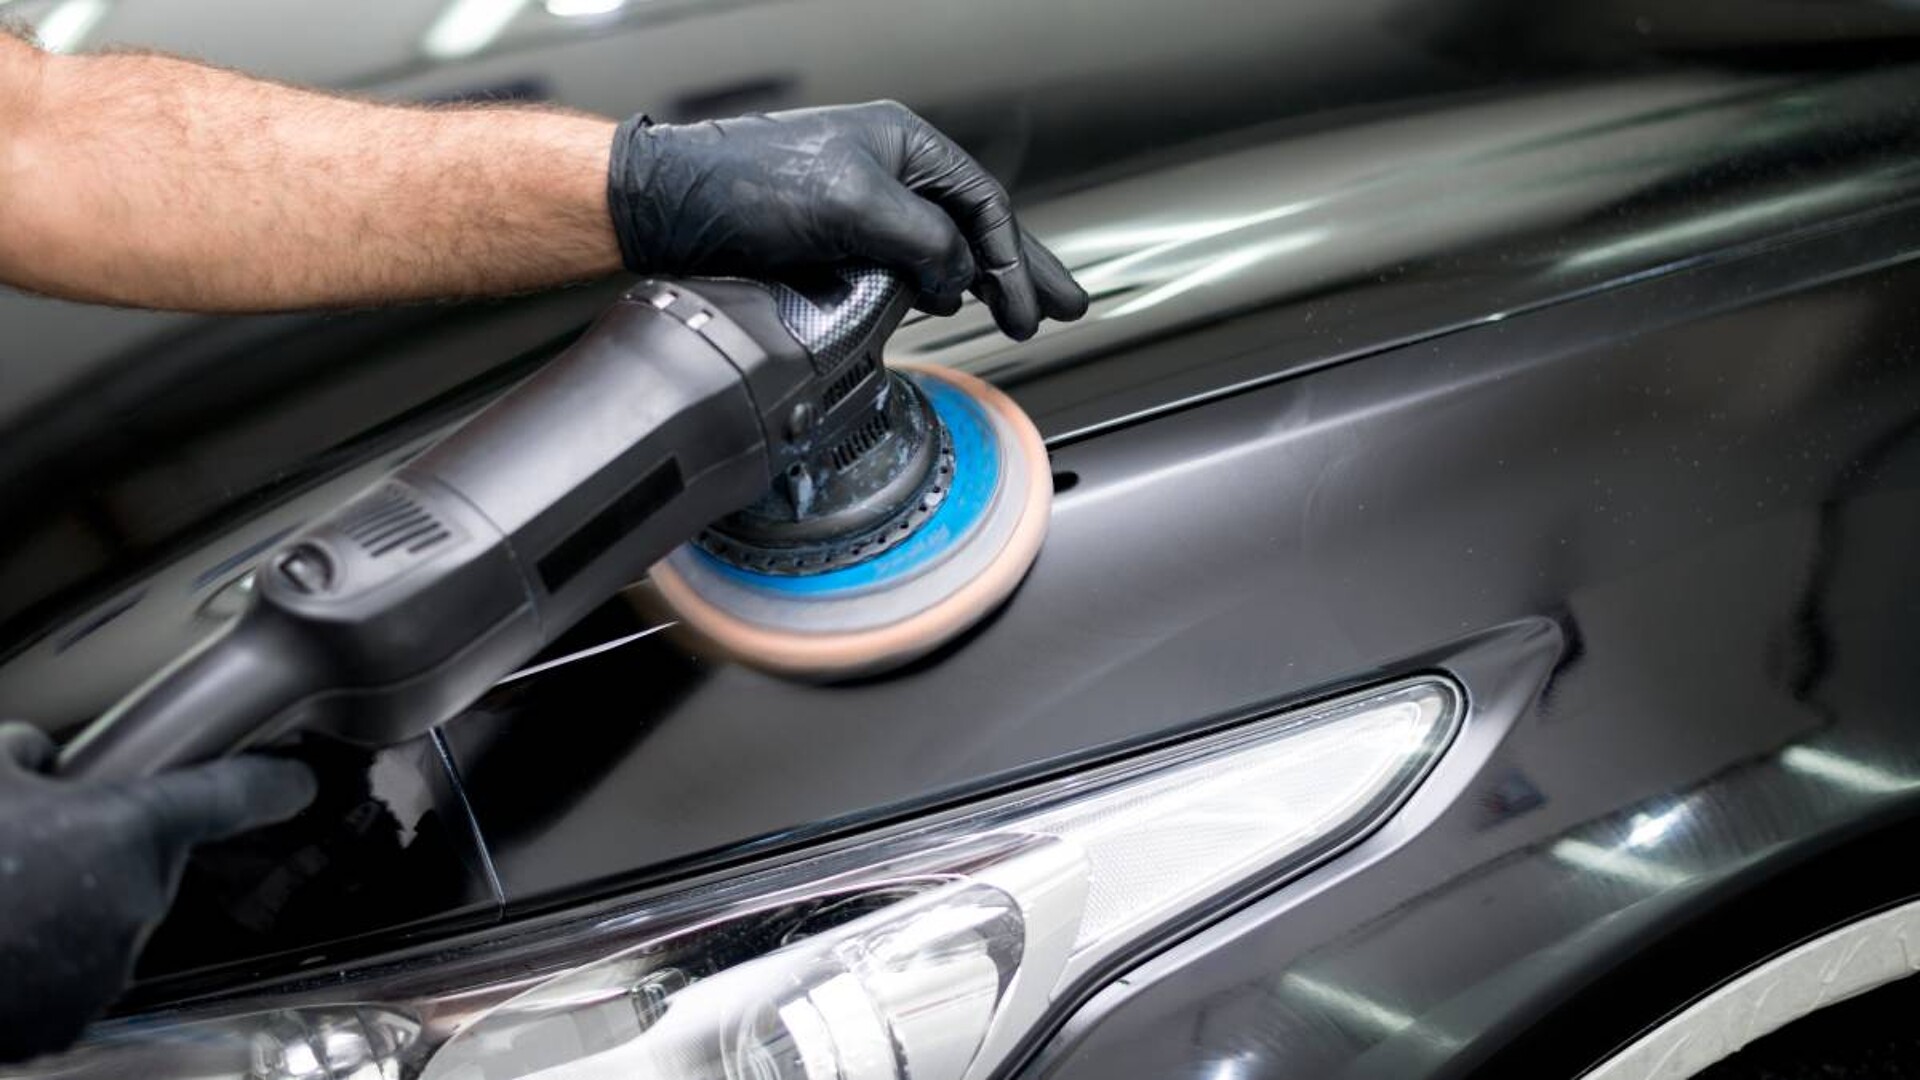 Car Detailing Costs: The Cost to Have Your Car's Interior Cleaned